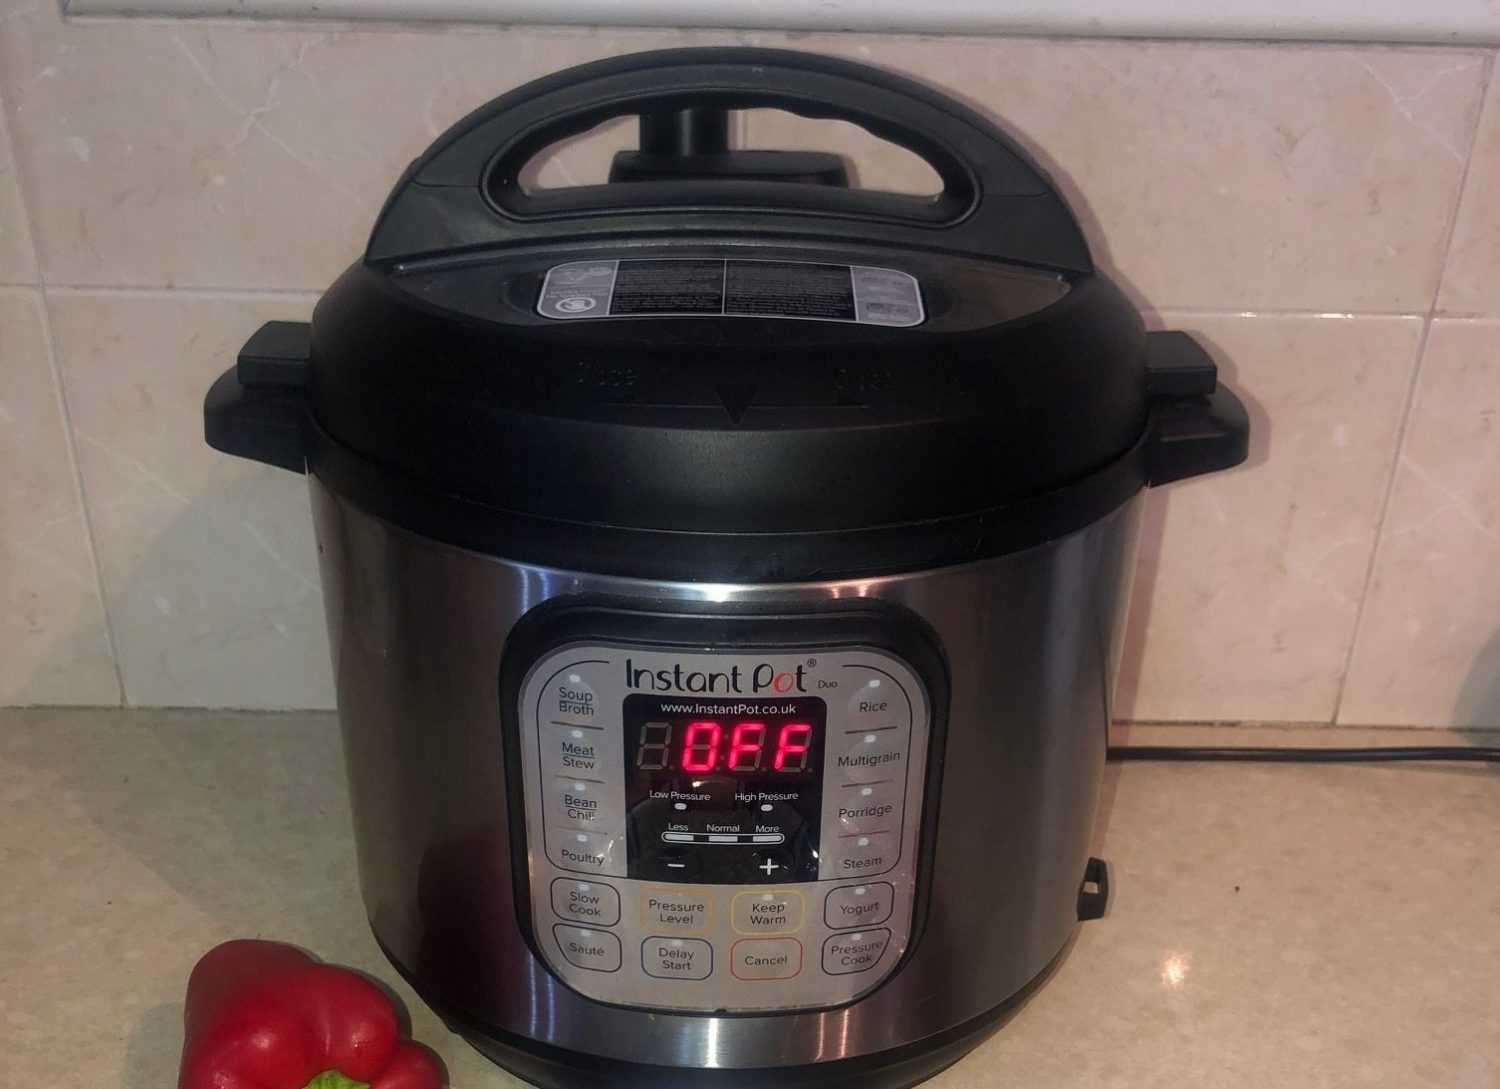 Why Does My Electric Pressure Cooker Keep Turning Off